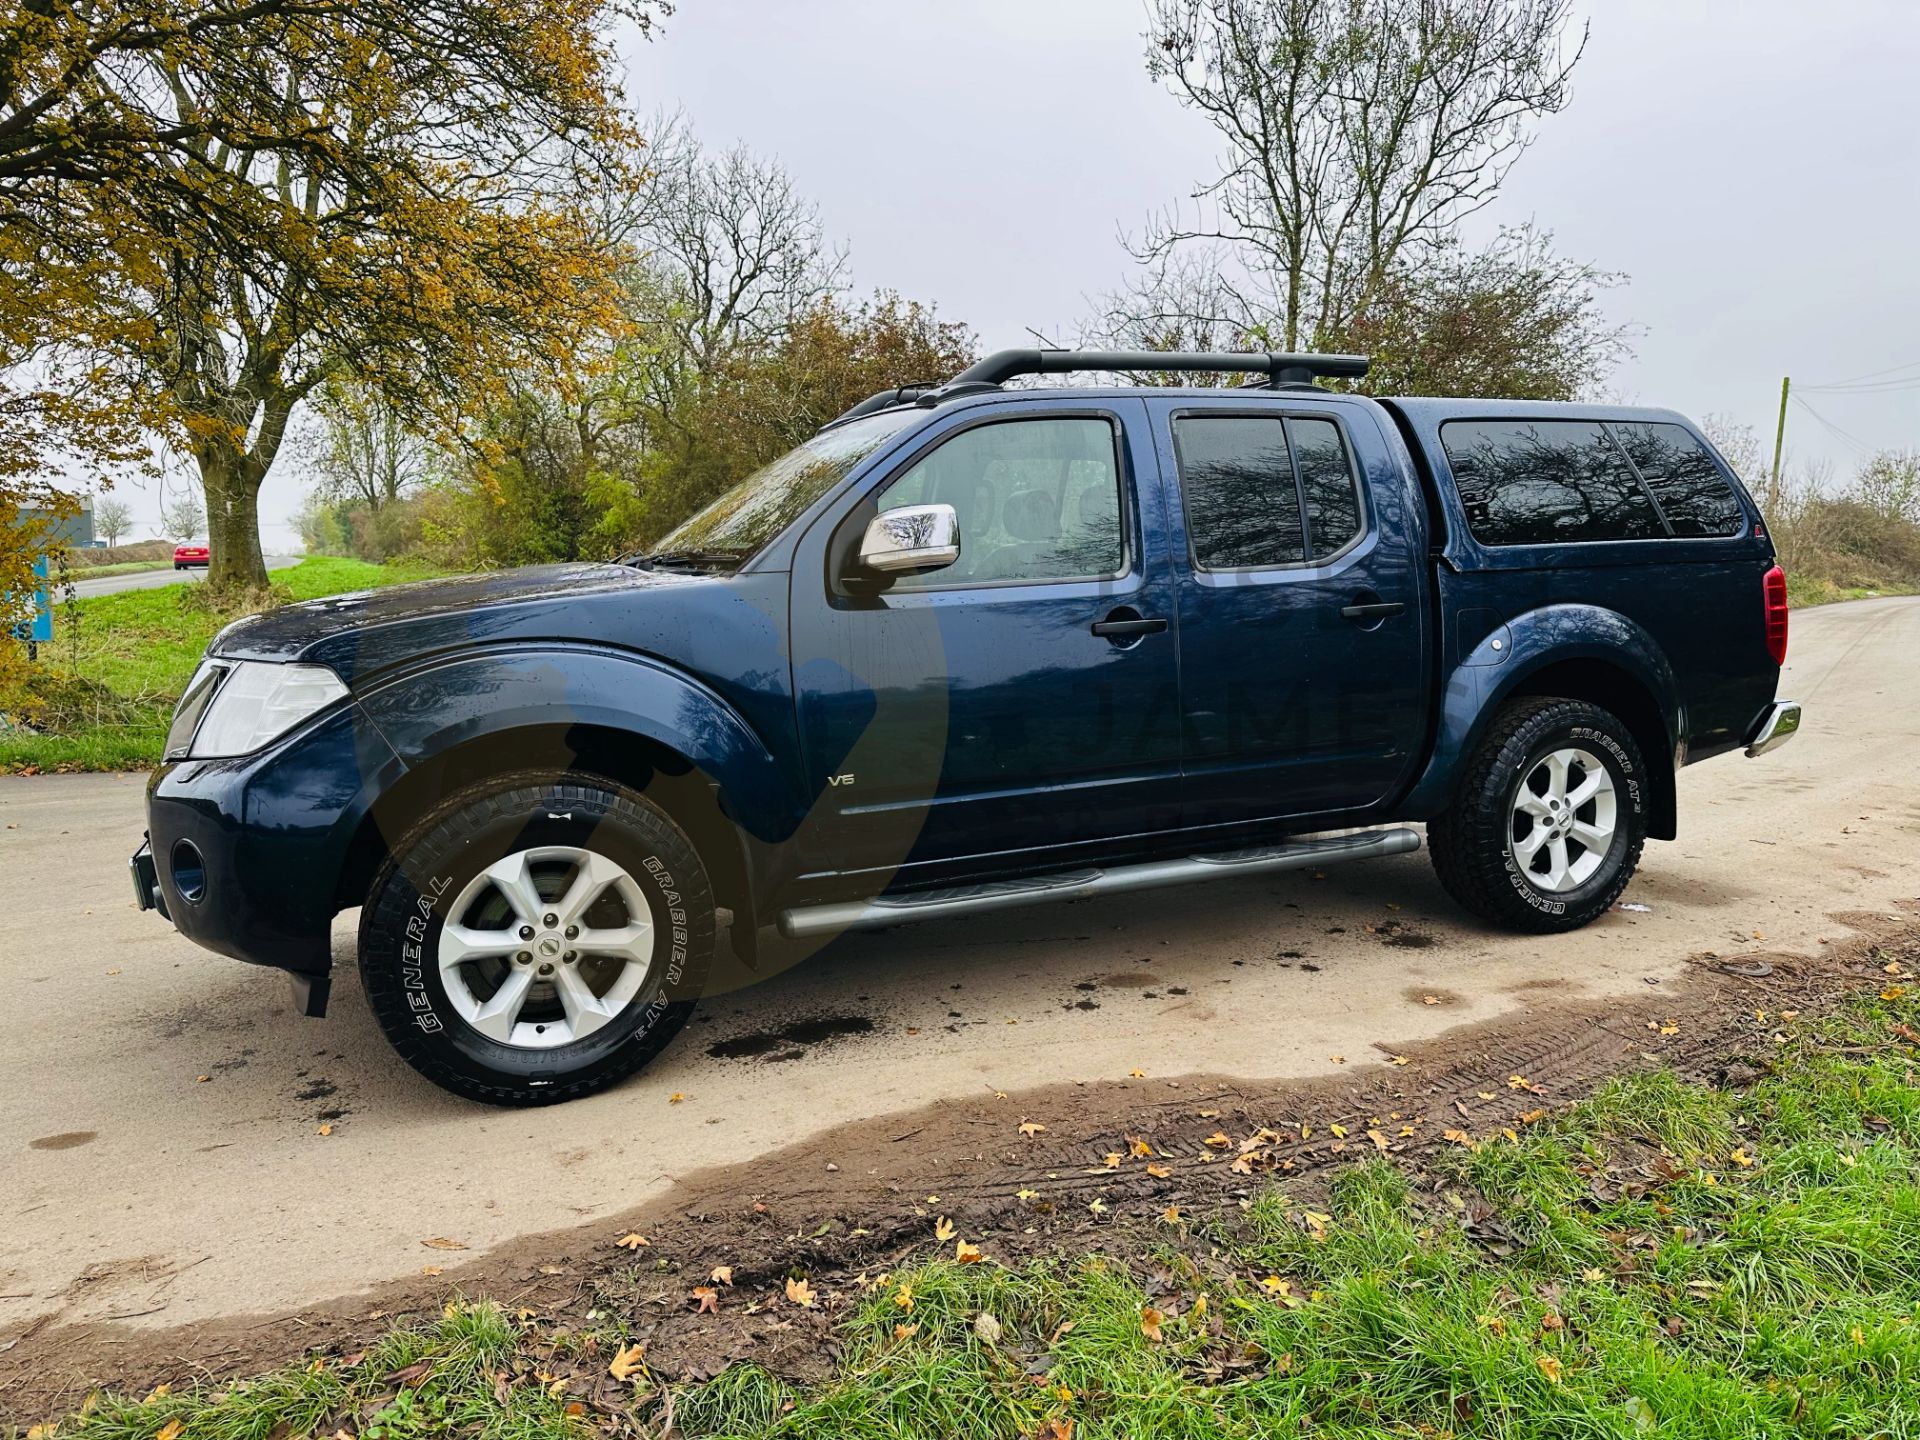 (ON SALE)NISSAN NAVARA *OUTLAW EDITION* 3.0 V6 TURBO DIESEL AUTOMATIC DOUBLE CAB PICKUP - 11 REG - Image 9 of 43